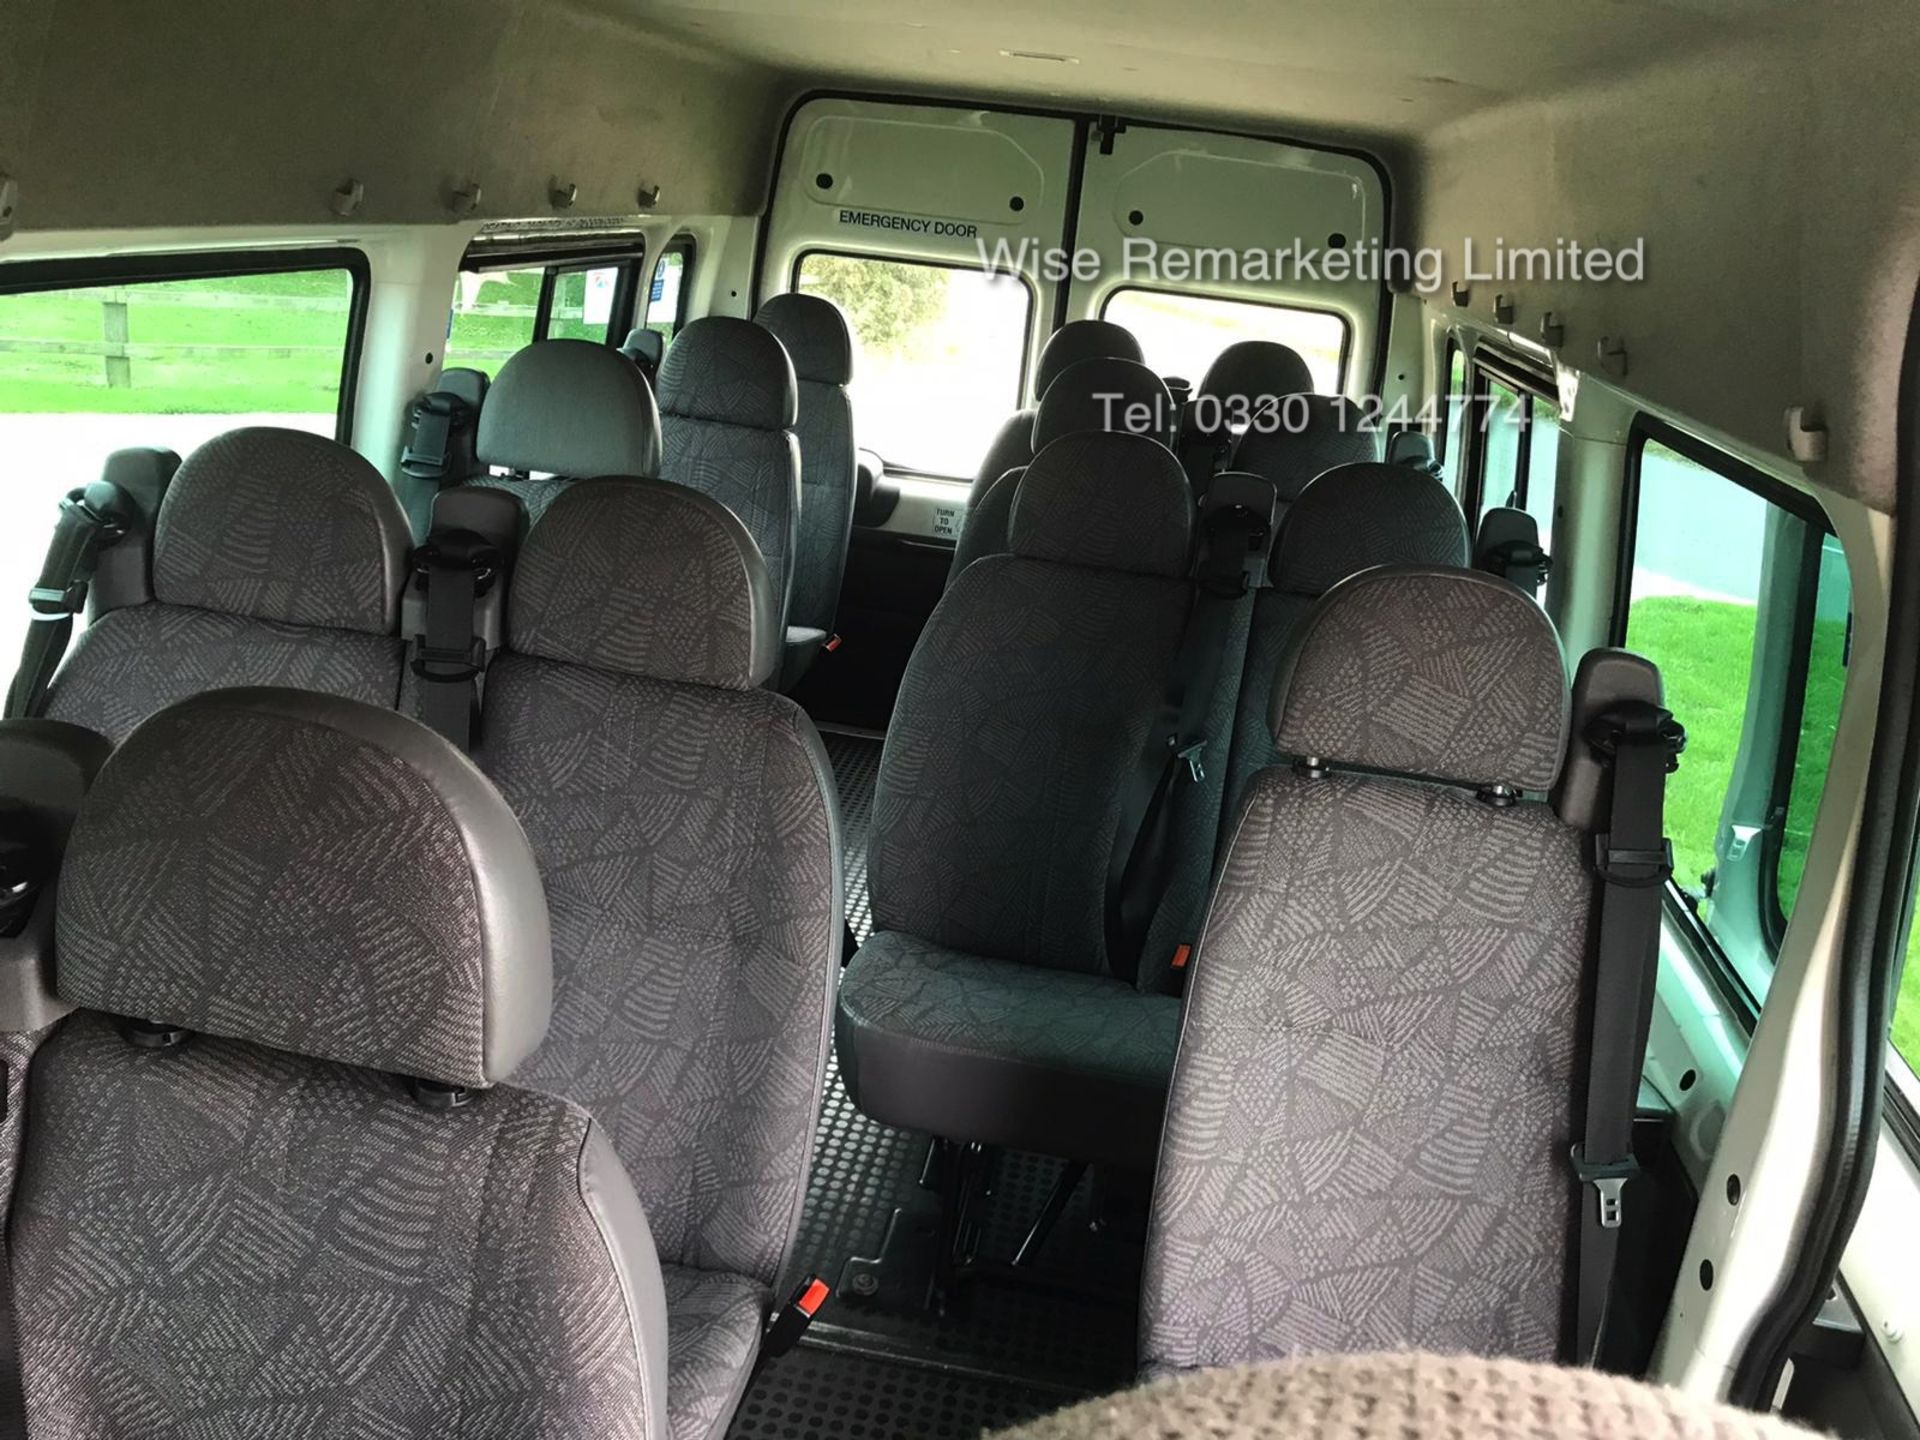 Ford Transit Minibus 2.4l (17 Seater) - 2005 Model - Service History - 1 Keeper - Only 31k Miles - Image 17 of 22